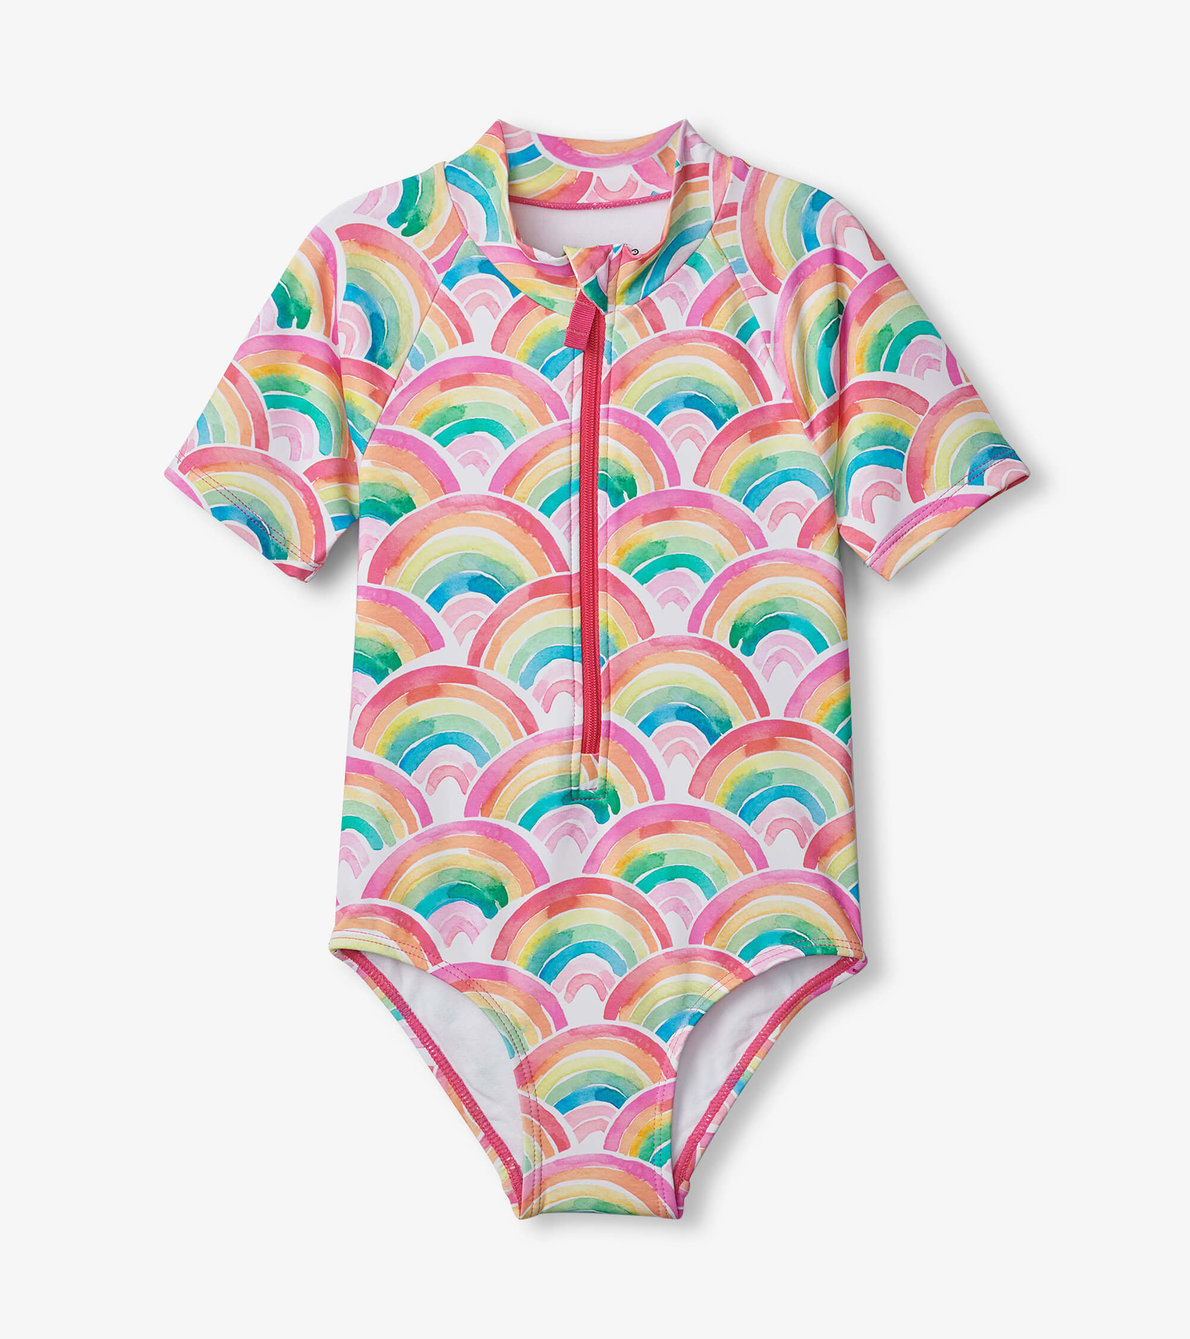 View larger image of Over the Rainbow Girl's One Piece Rashguard